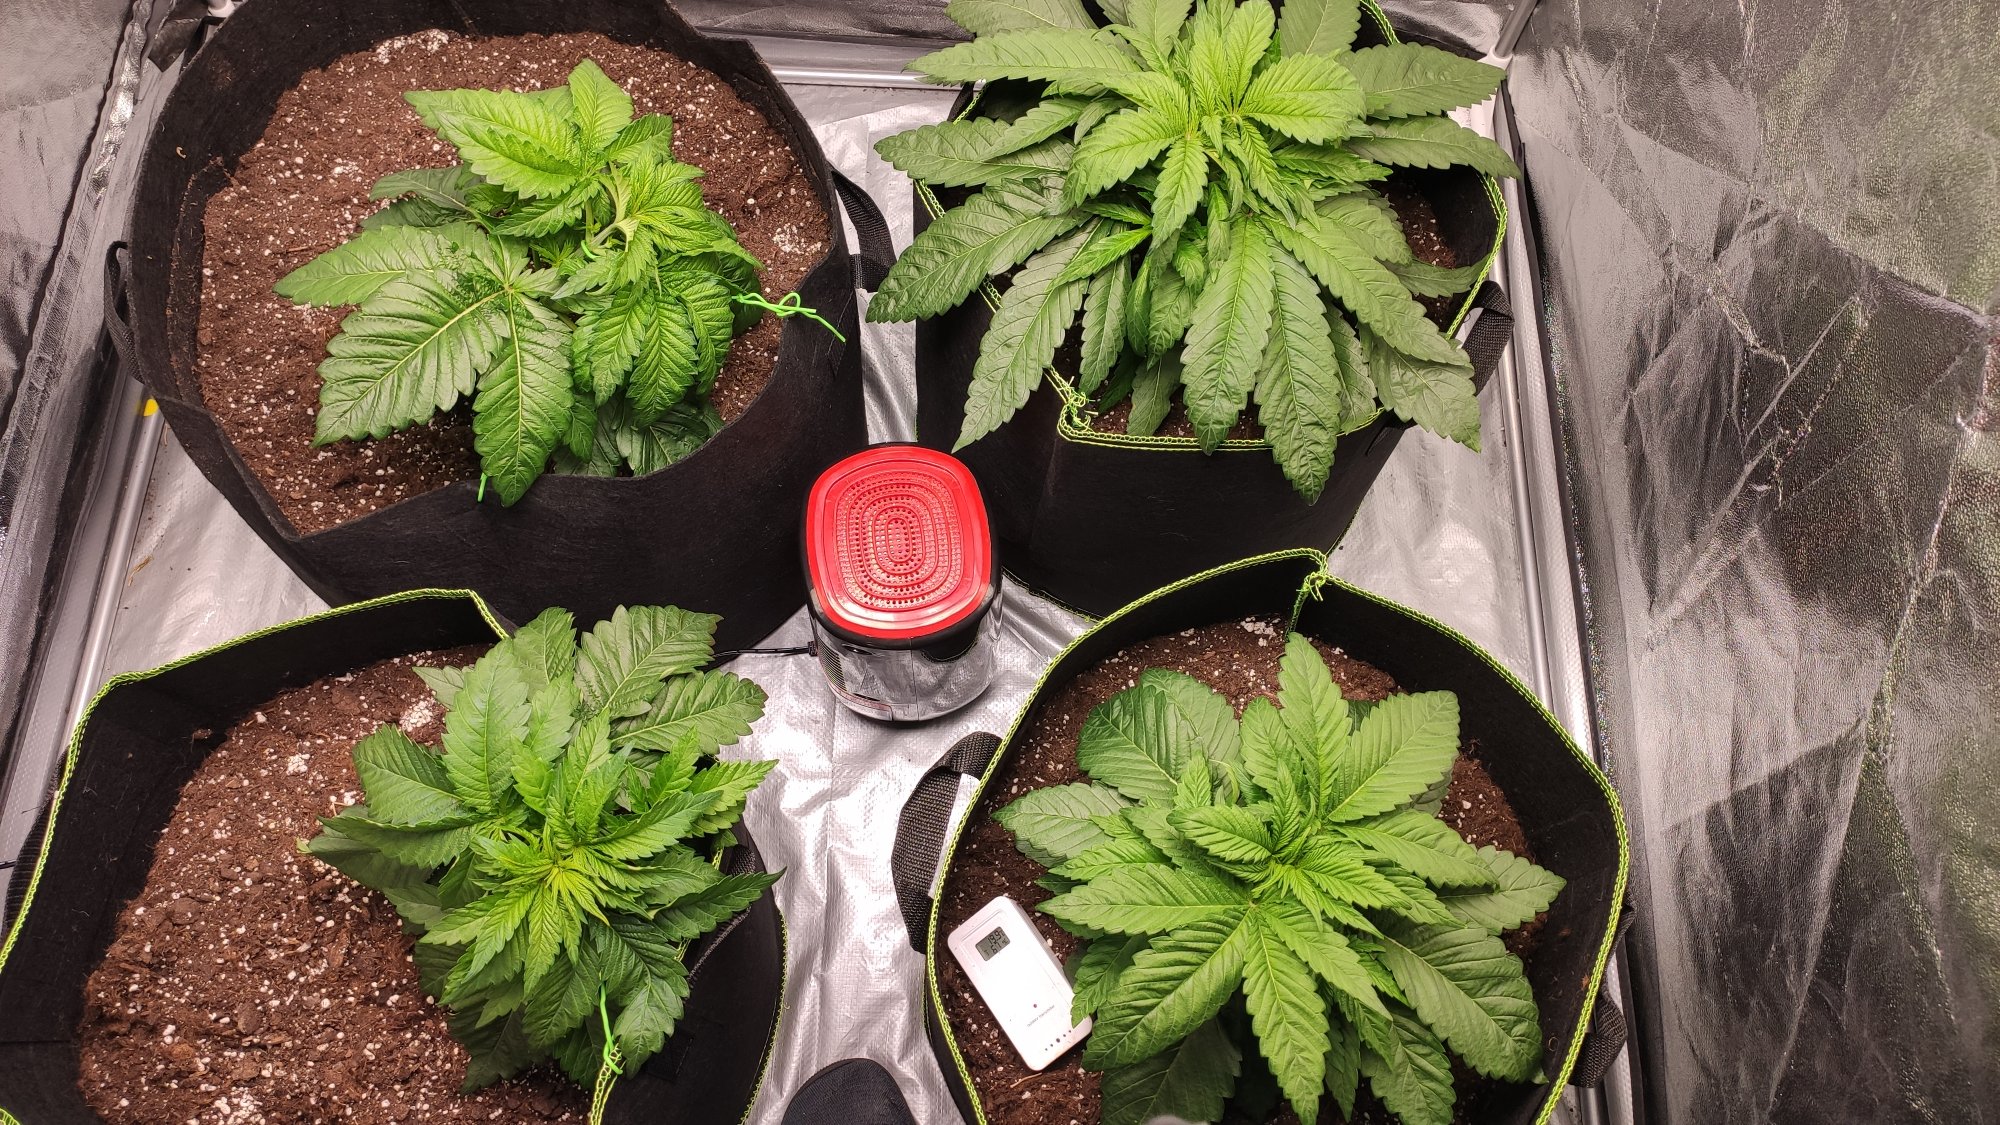 Did i get lucky on a phenotype very explosive growth